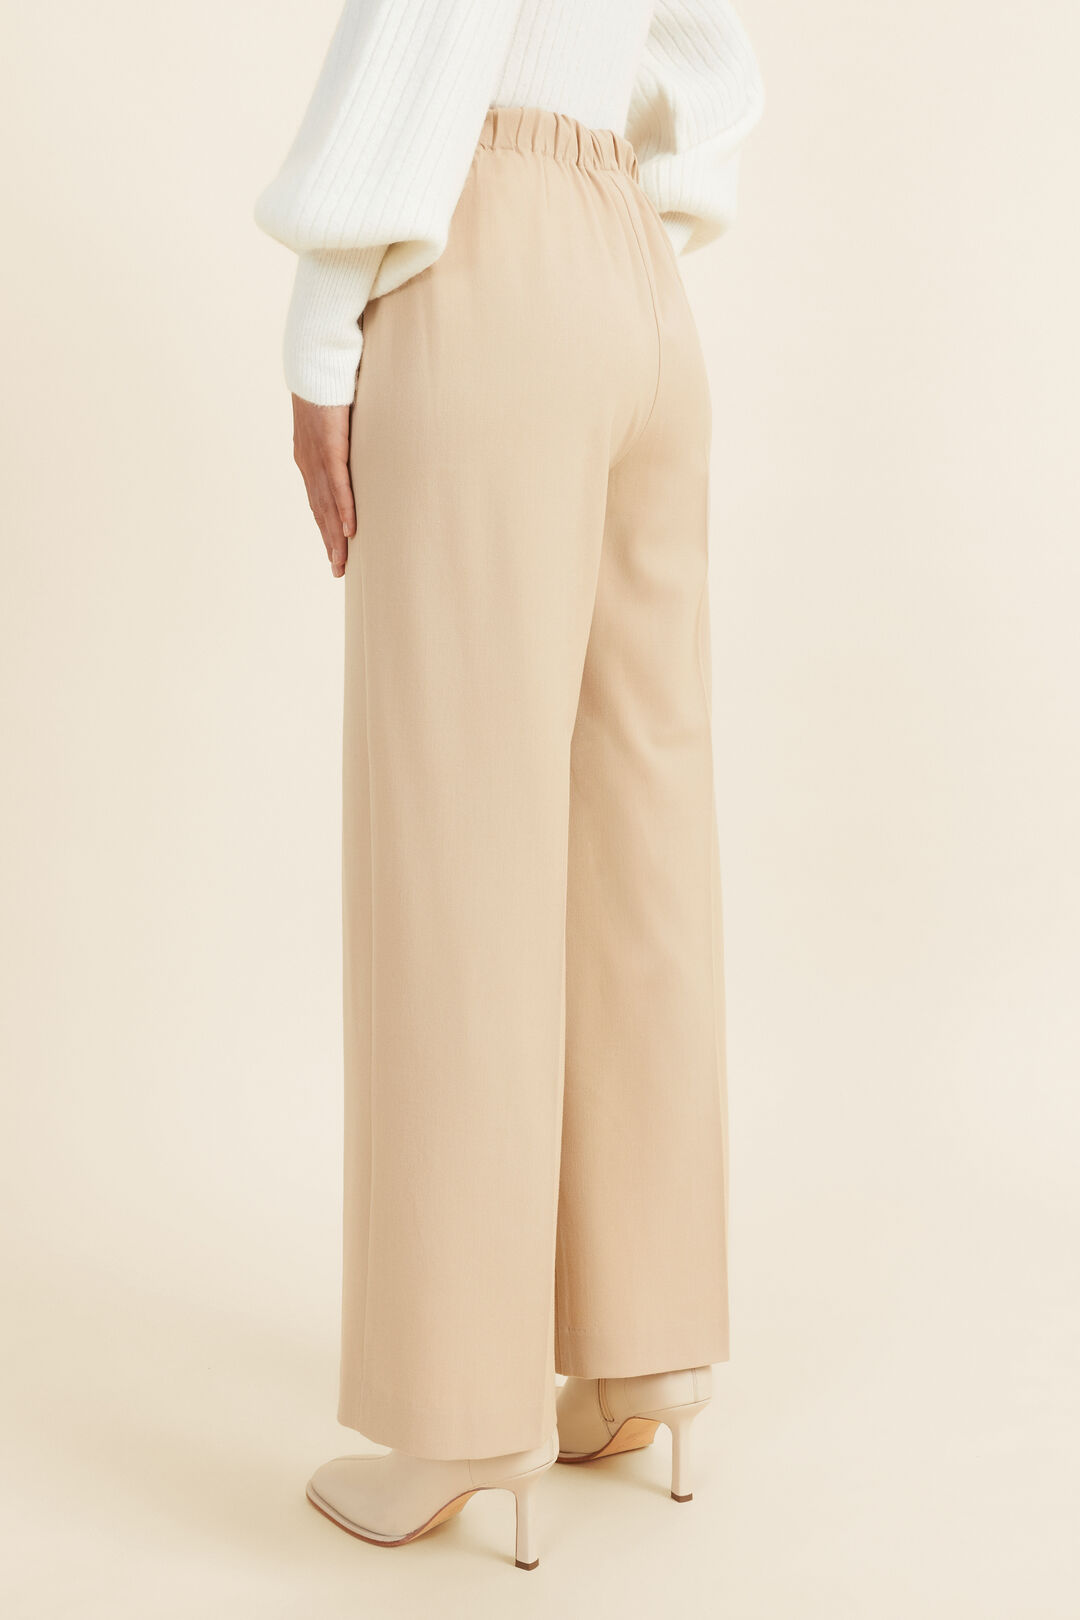 Wide Leg Pull On Pant  Champagne Beige  hi-res